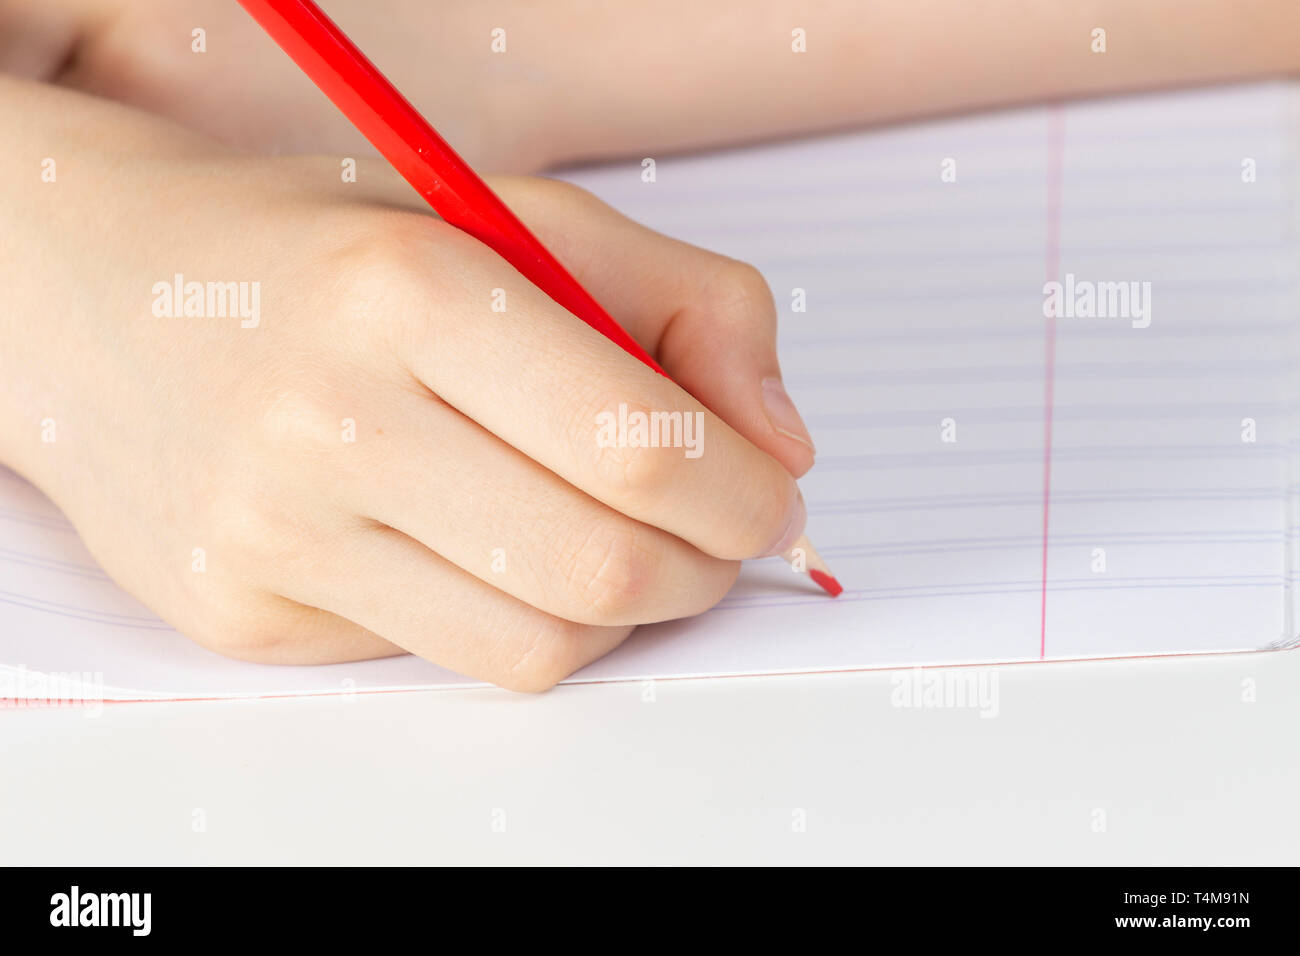 Kid hand holding red pencil against blank page of notebook Stock Photo